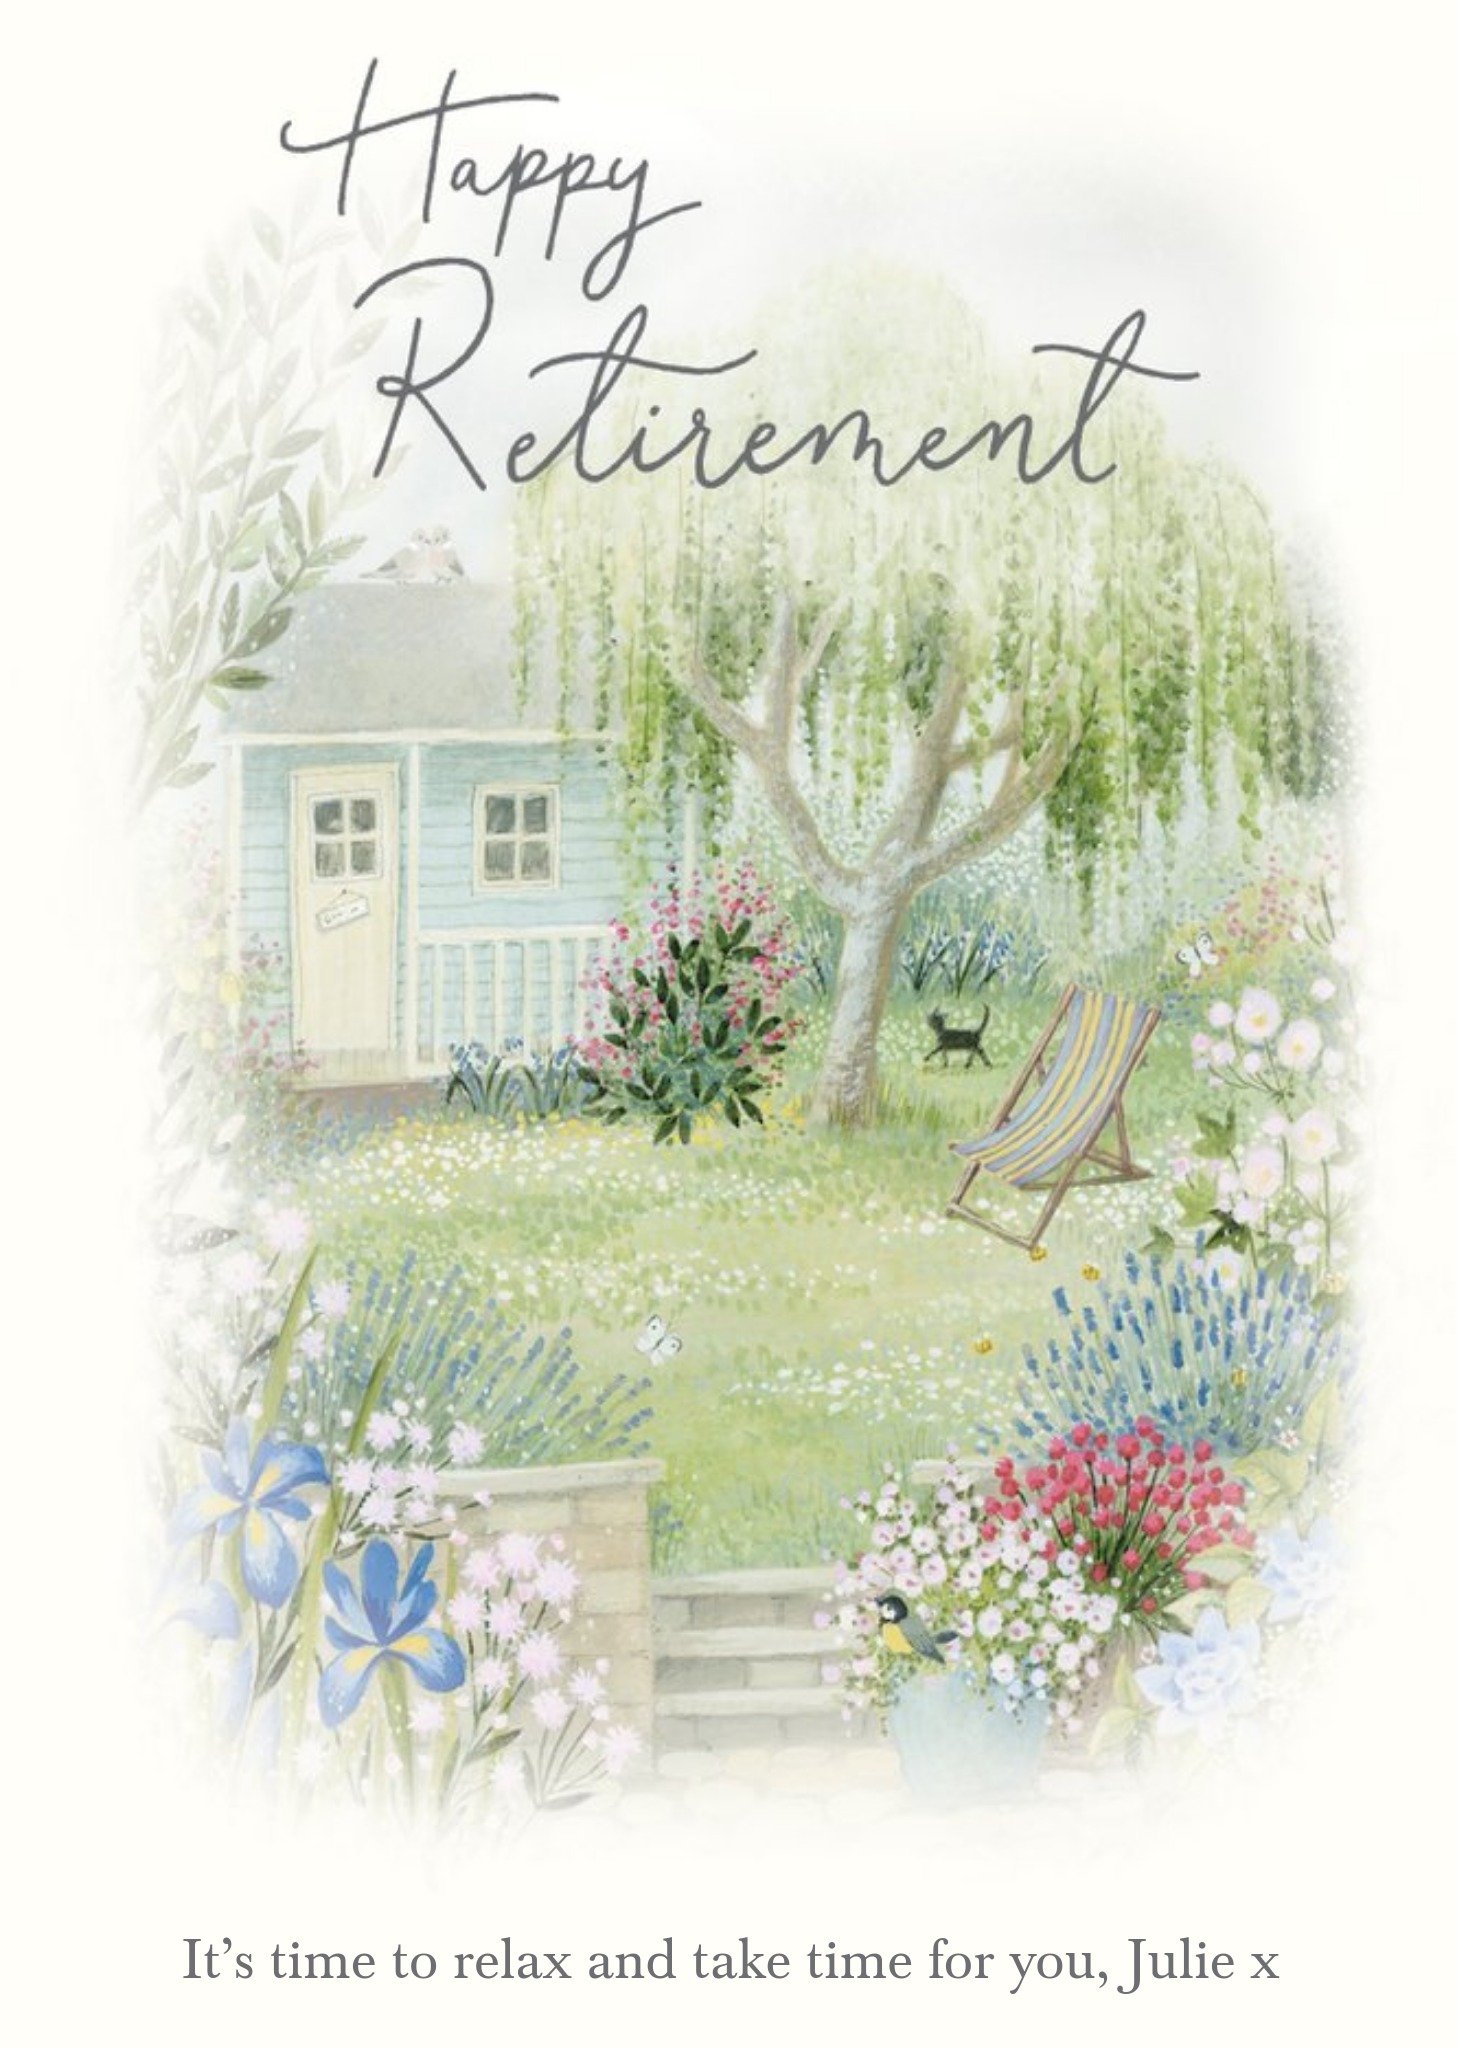 Moonpig Illustration Of A Garden Filled With Flowers Happy Retirement Card Ecard